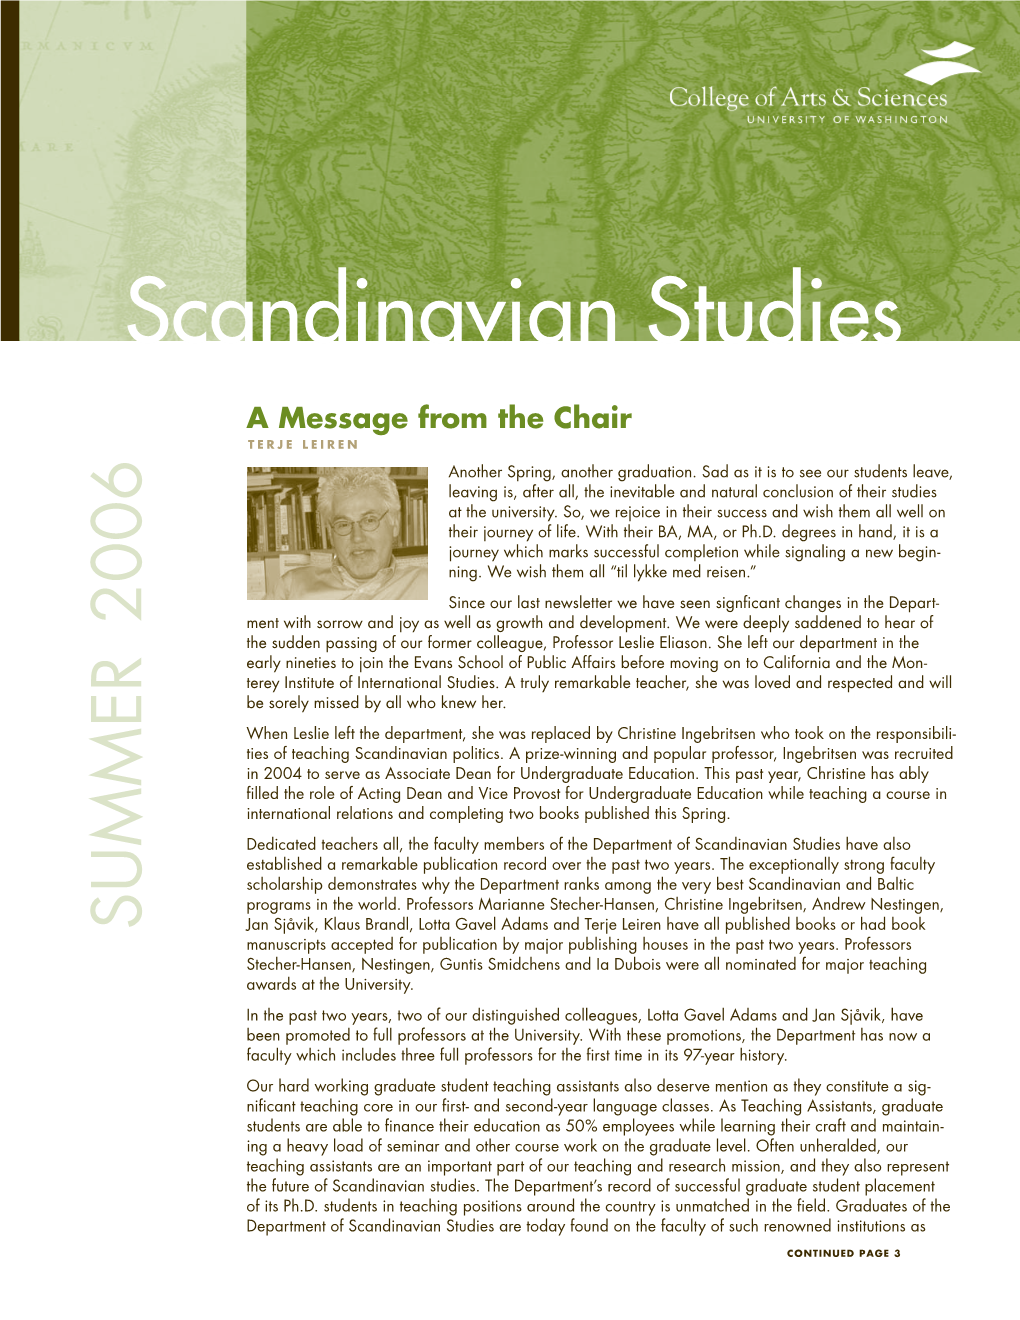 Department of Scandinavian Studies Have Also Established a Remarkable Publication Record Over the Past Two Years